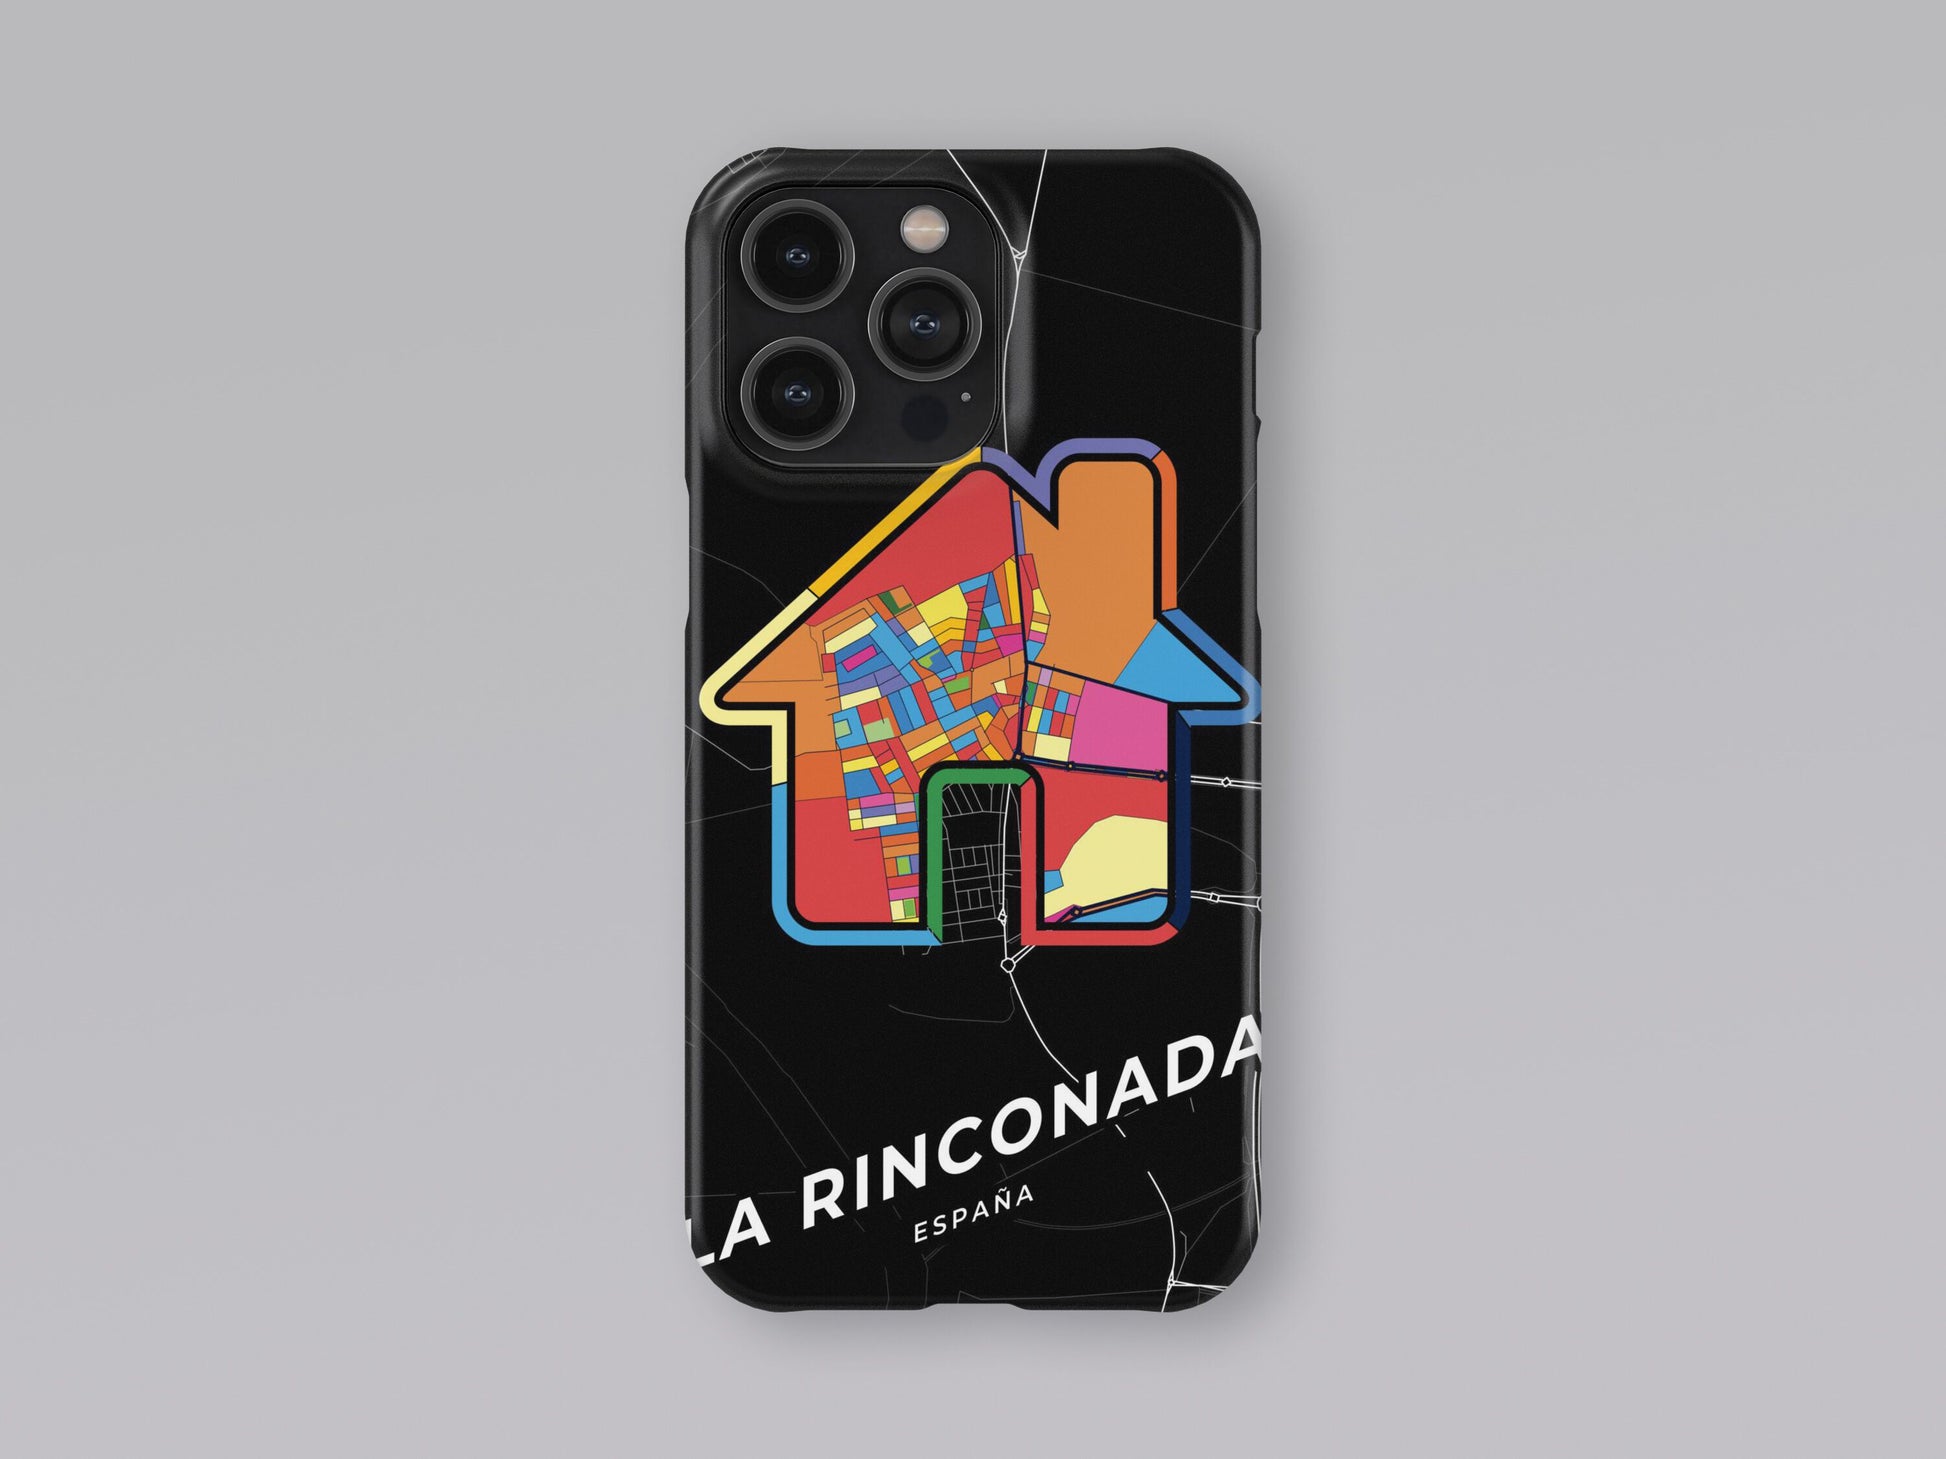 La Rinconada Spain slim phone case with colorful icon. Birthday, wedding or housewarming gift. Couple match cases. 3